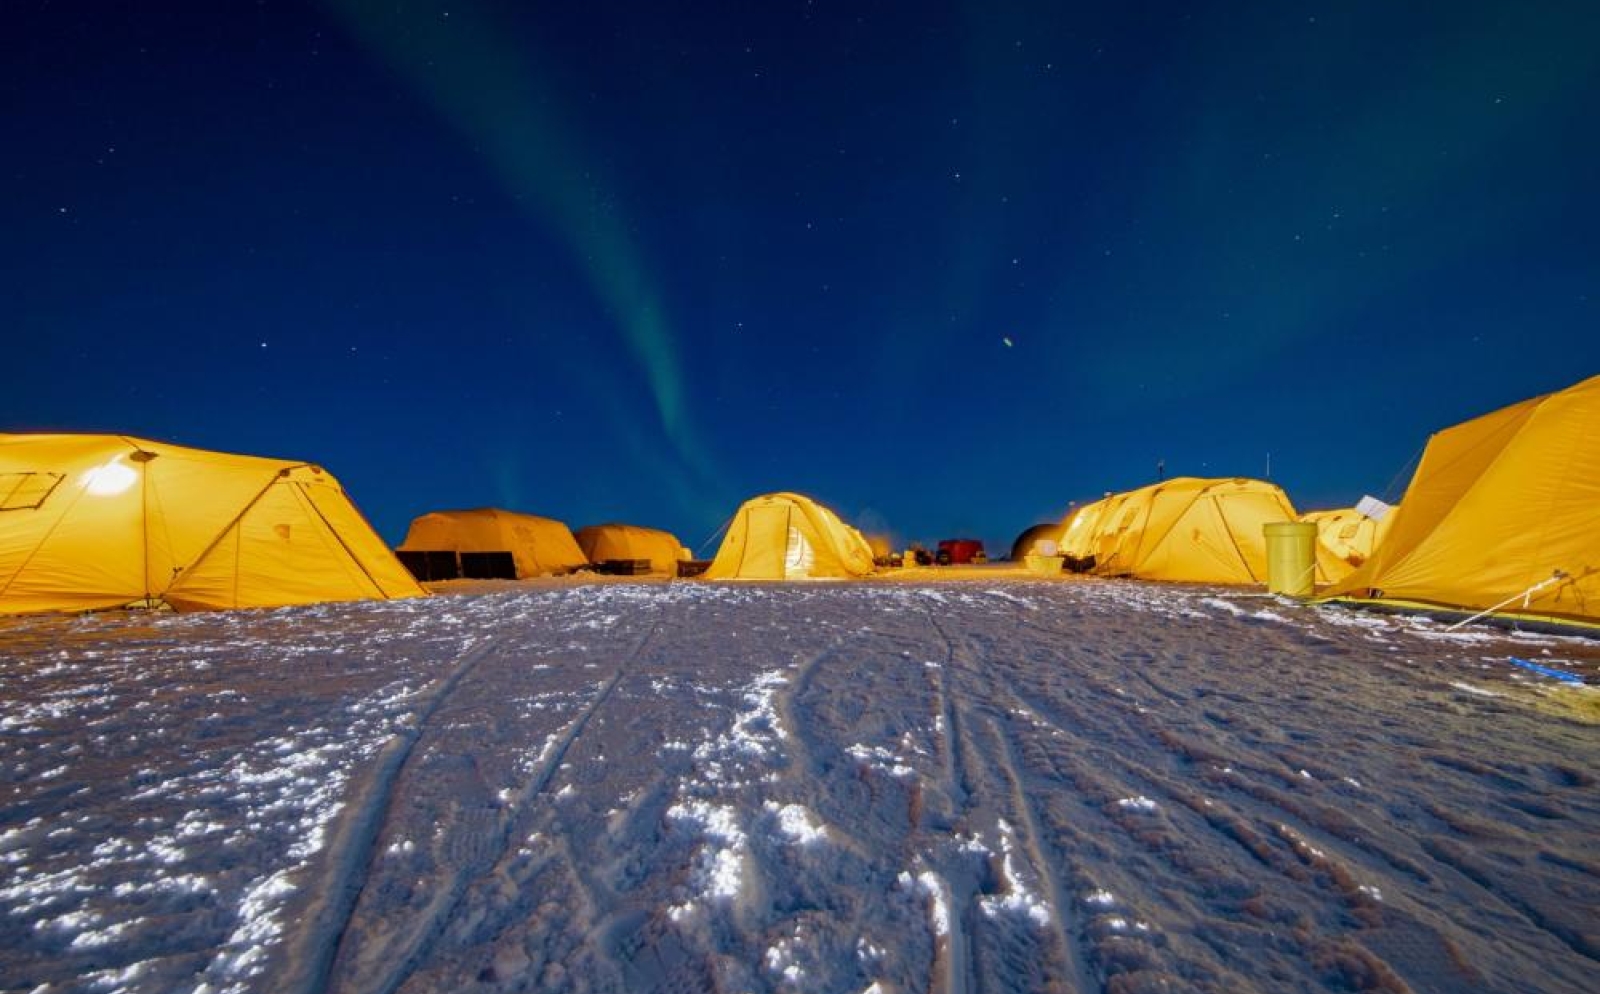 The Northern Lights illuminate the Arctic sky over Ice Camp Queenfish. Credit: U.S. Navy Petty Officer 1st Class Cameron Stoner.